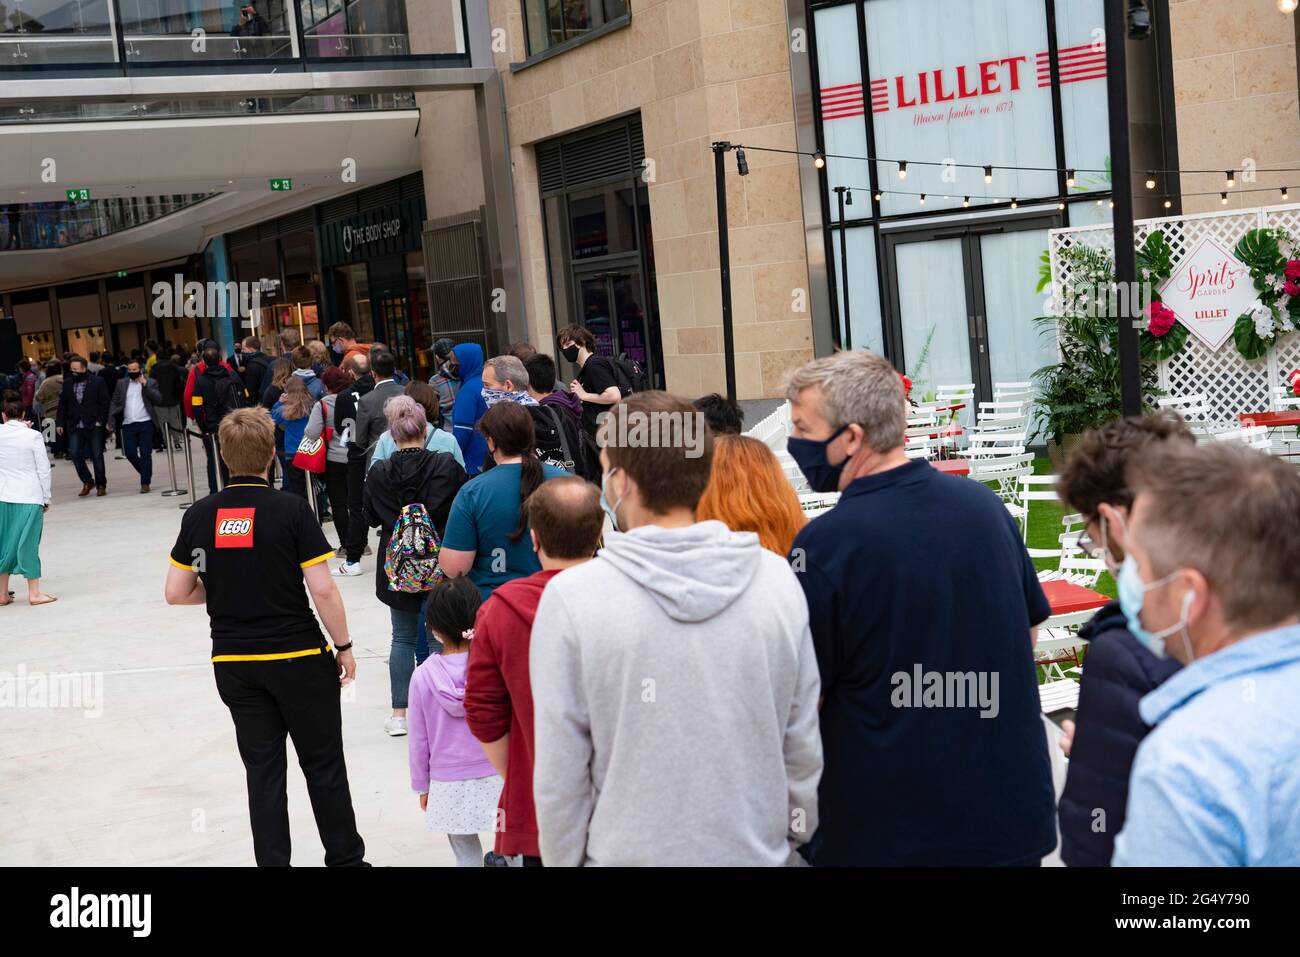 Edinburgh, Scotland, UK. 24 June 2021. First images of the new St James Quarter which opened this morning in Edinburgh. The large retail and residential complex replaced the St James Centre which occupied the site for many years. Pic; Queues formed early outside the Lego store. Iain Masterton/Alamy Live News Stock Photo